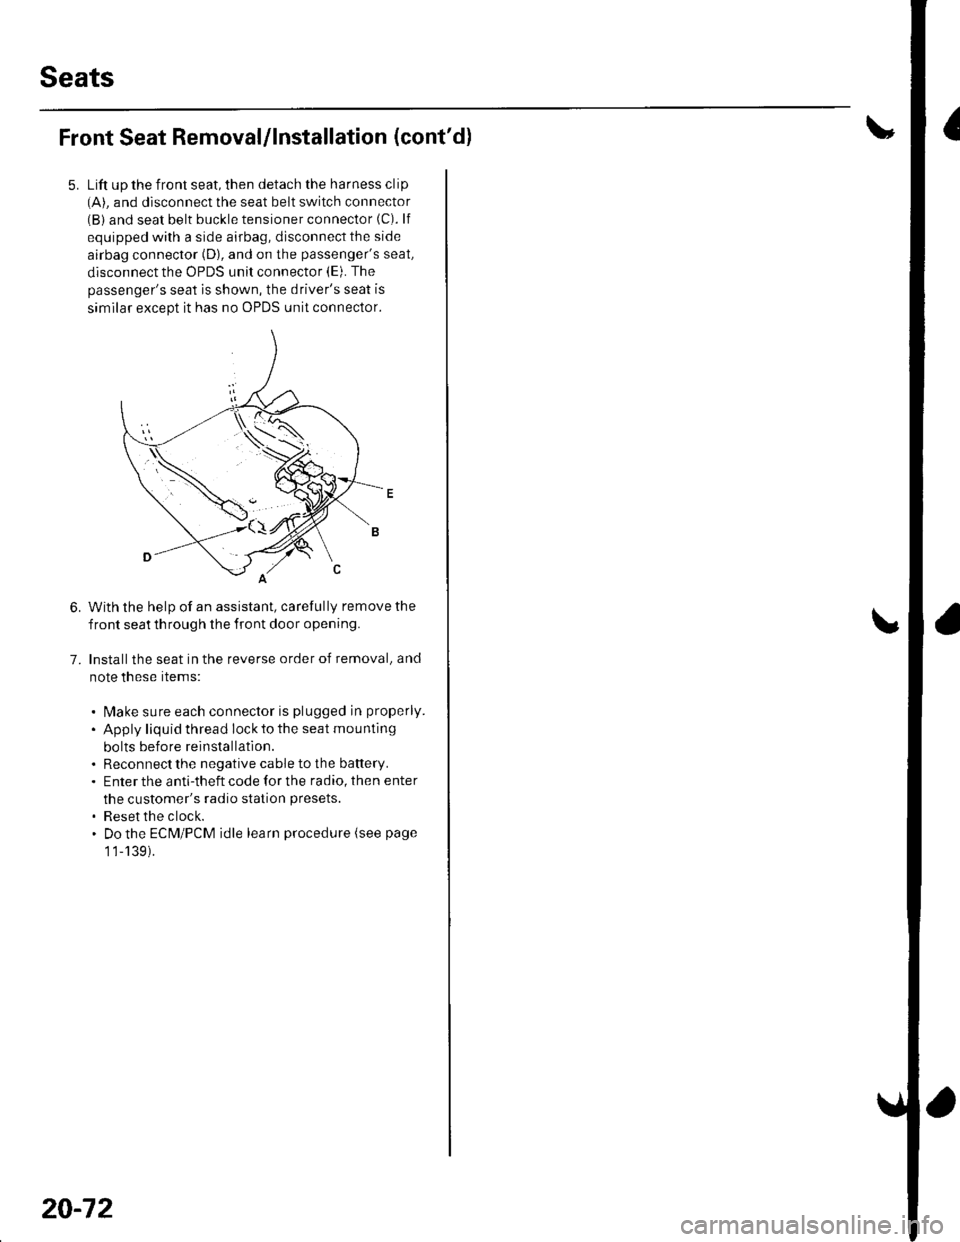 HONDA CIVIC 2003 7.G Owners Guide Seats
Front Seat Removal/lnstallation (contdl
Lift up the front seat, then detach the harness clip(A). and disconnect the seat belt switch connector(B) and seat belt buckle tensioner connector (C). l